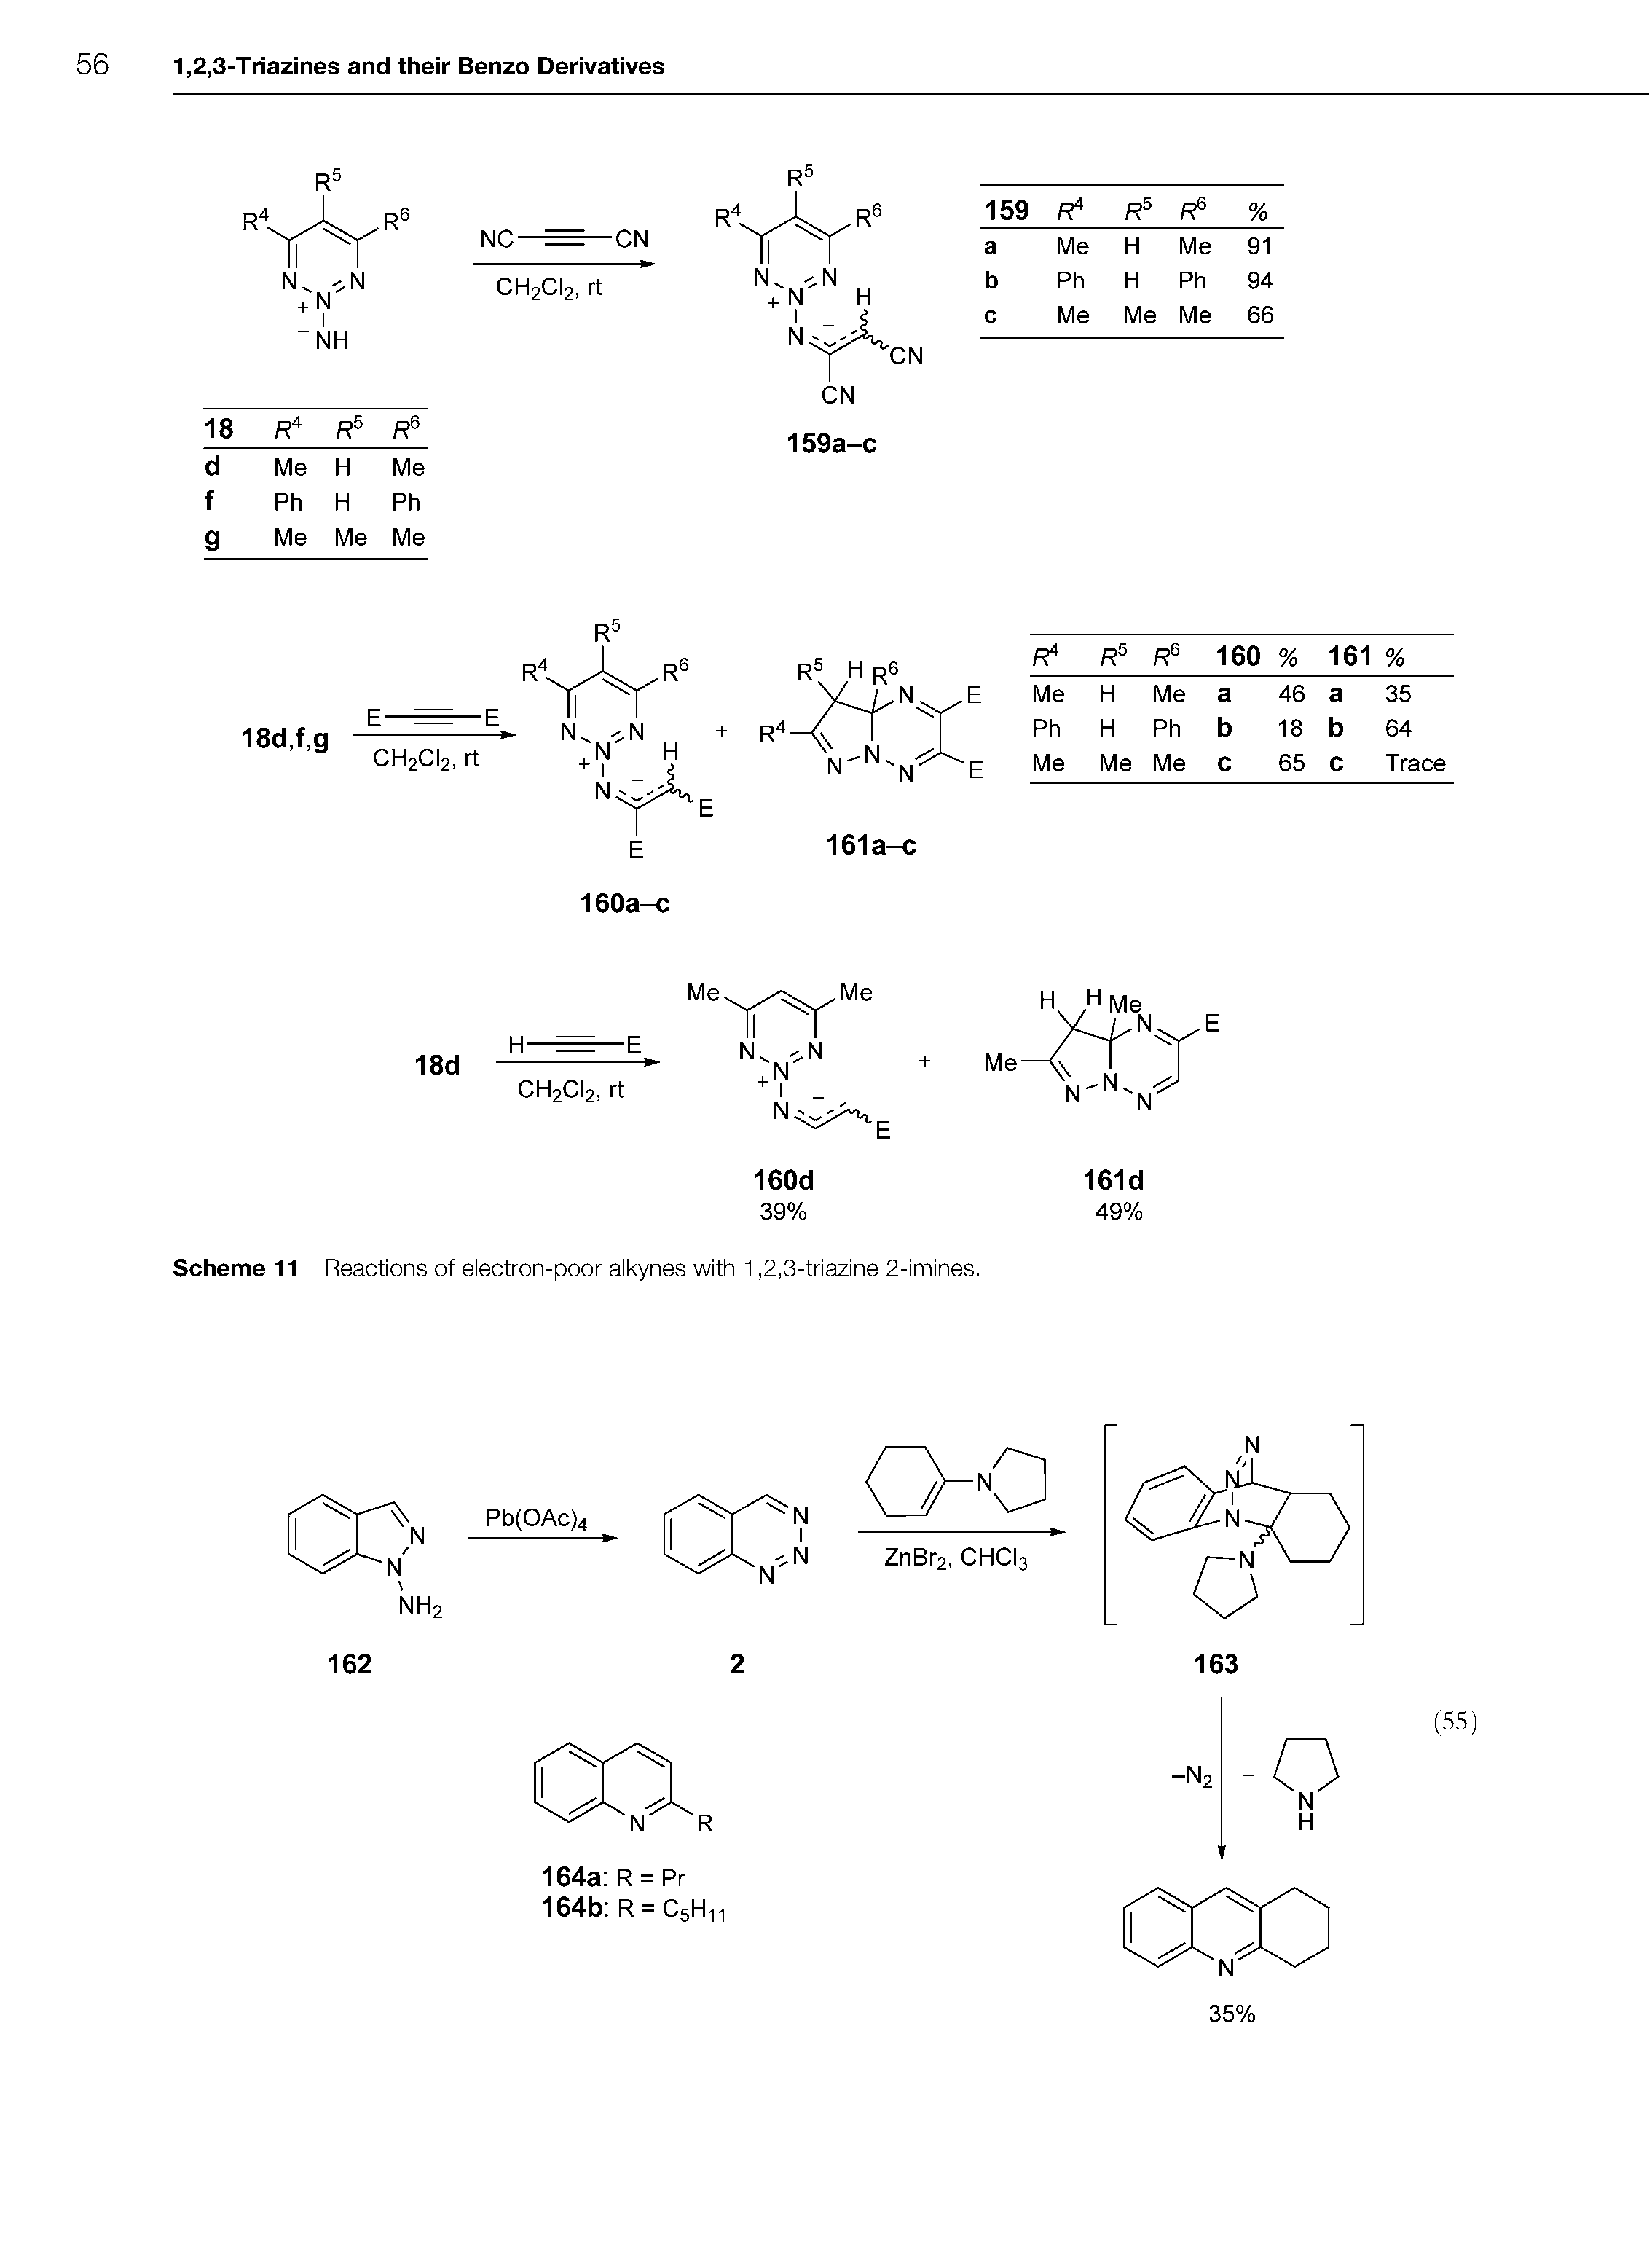 Scheme 11 Reactions of electron-poor alkynes with 1,2,3-triazine 2-imines.